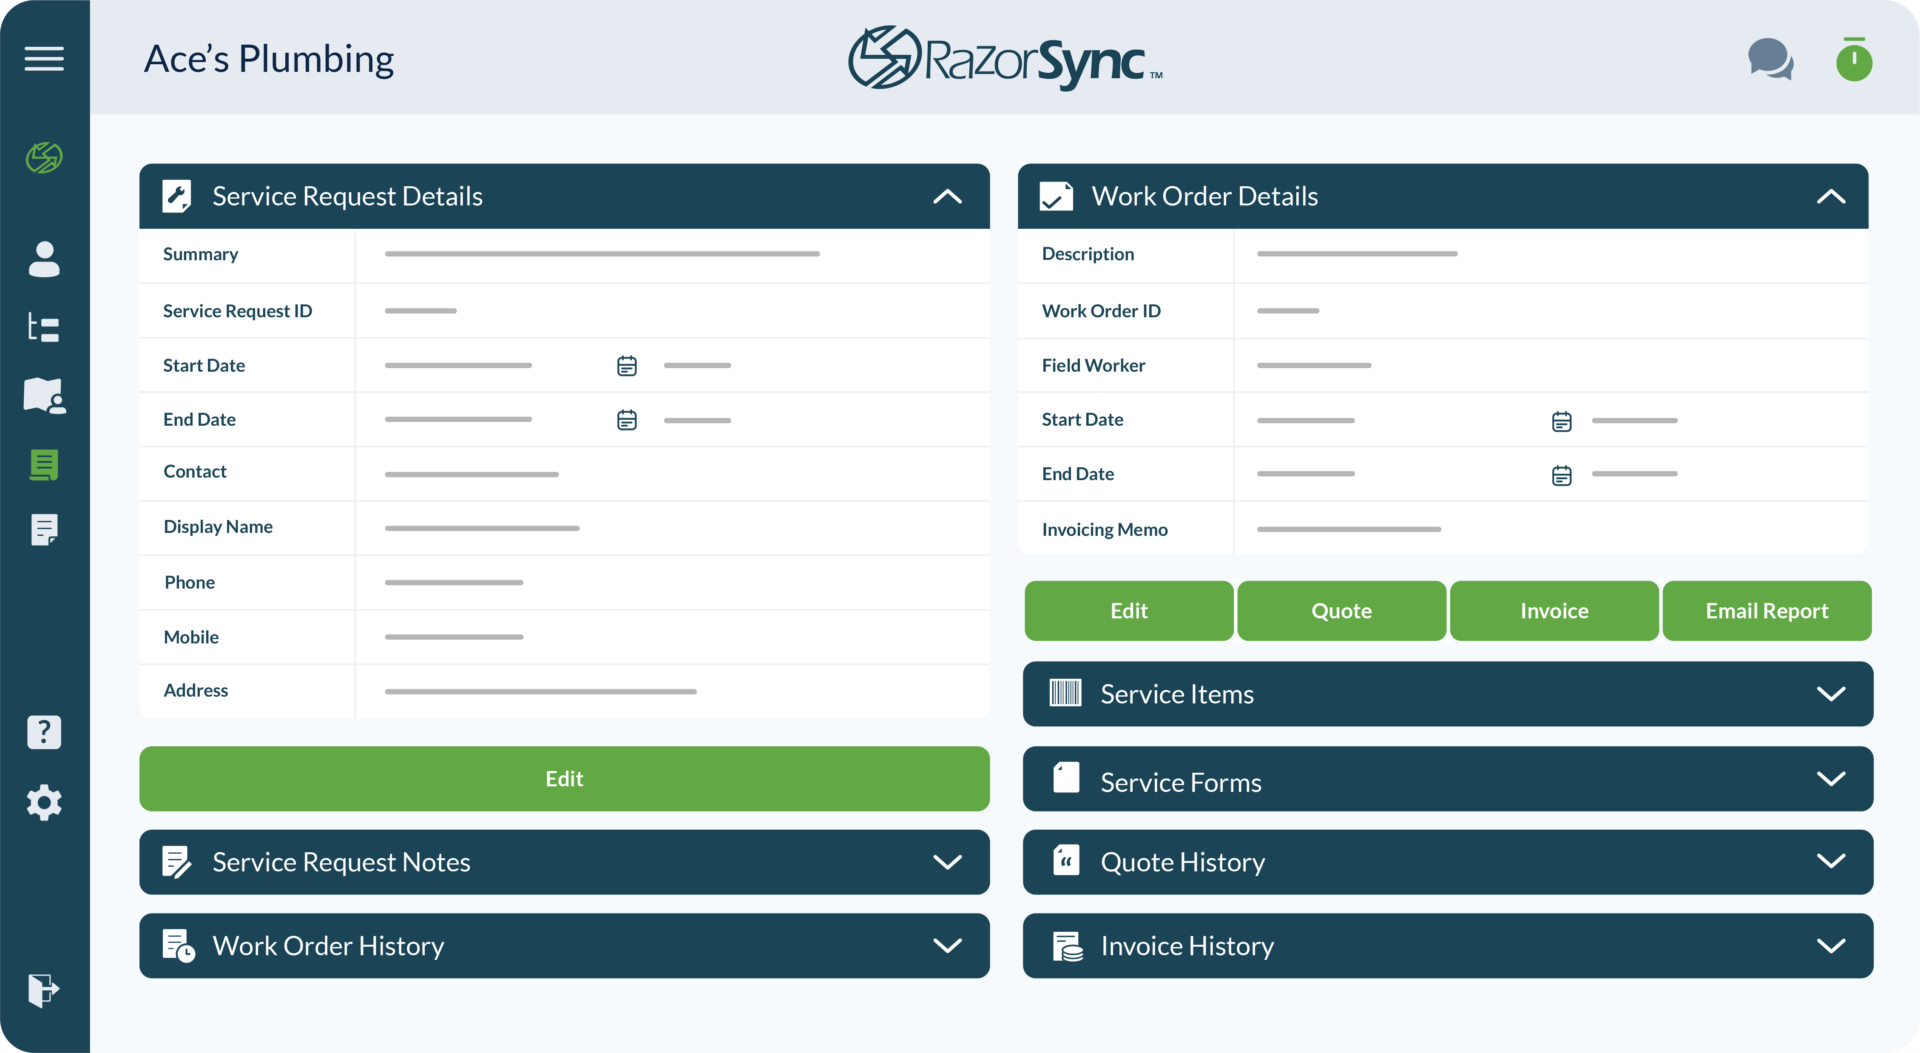 razorsync app screen with menu, service requests, work order details, and more